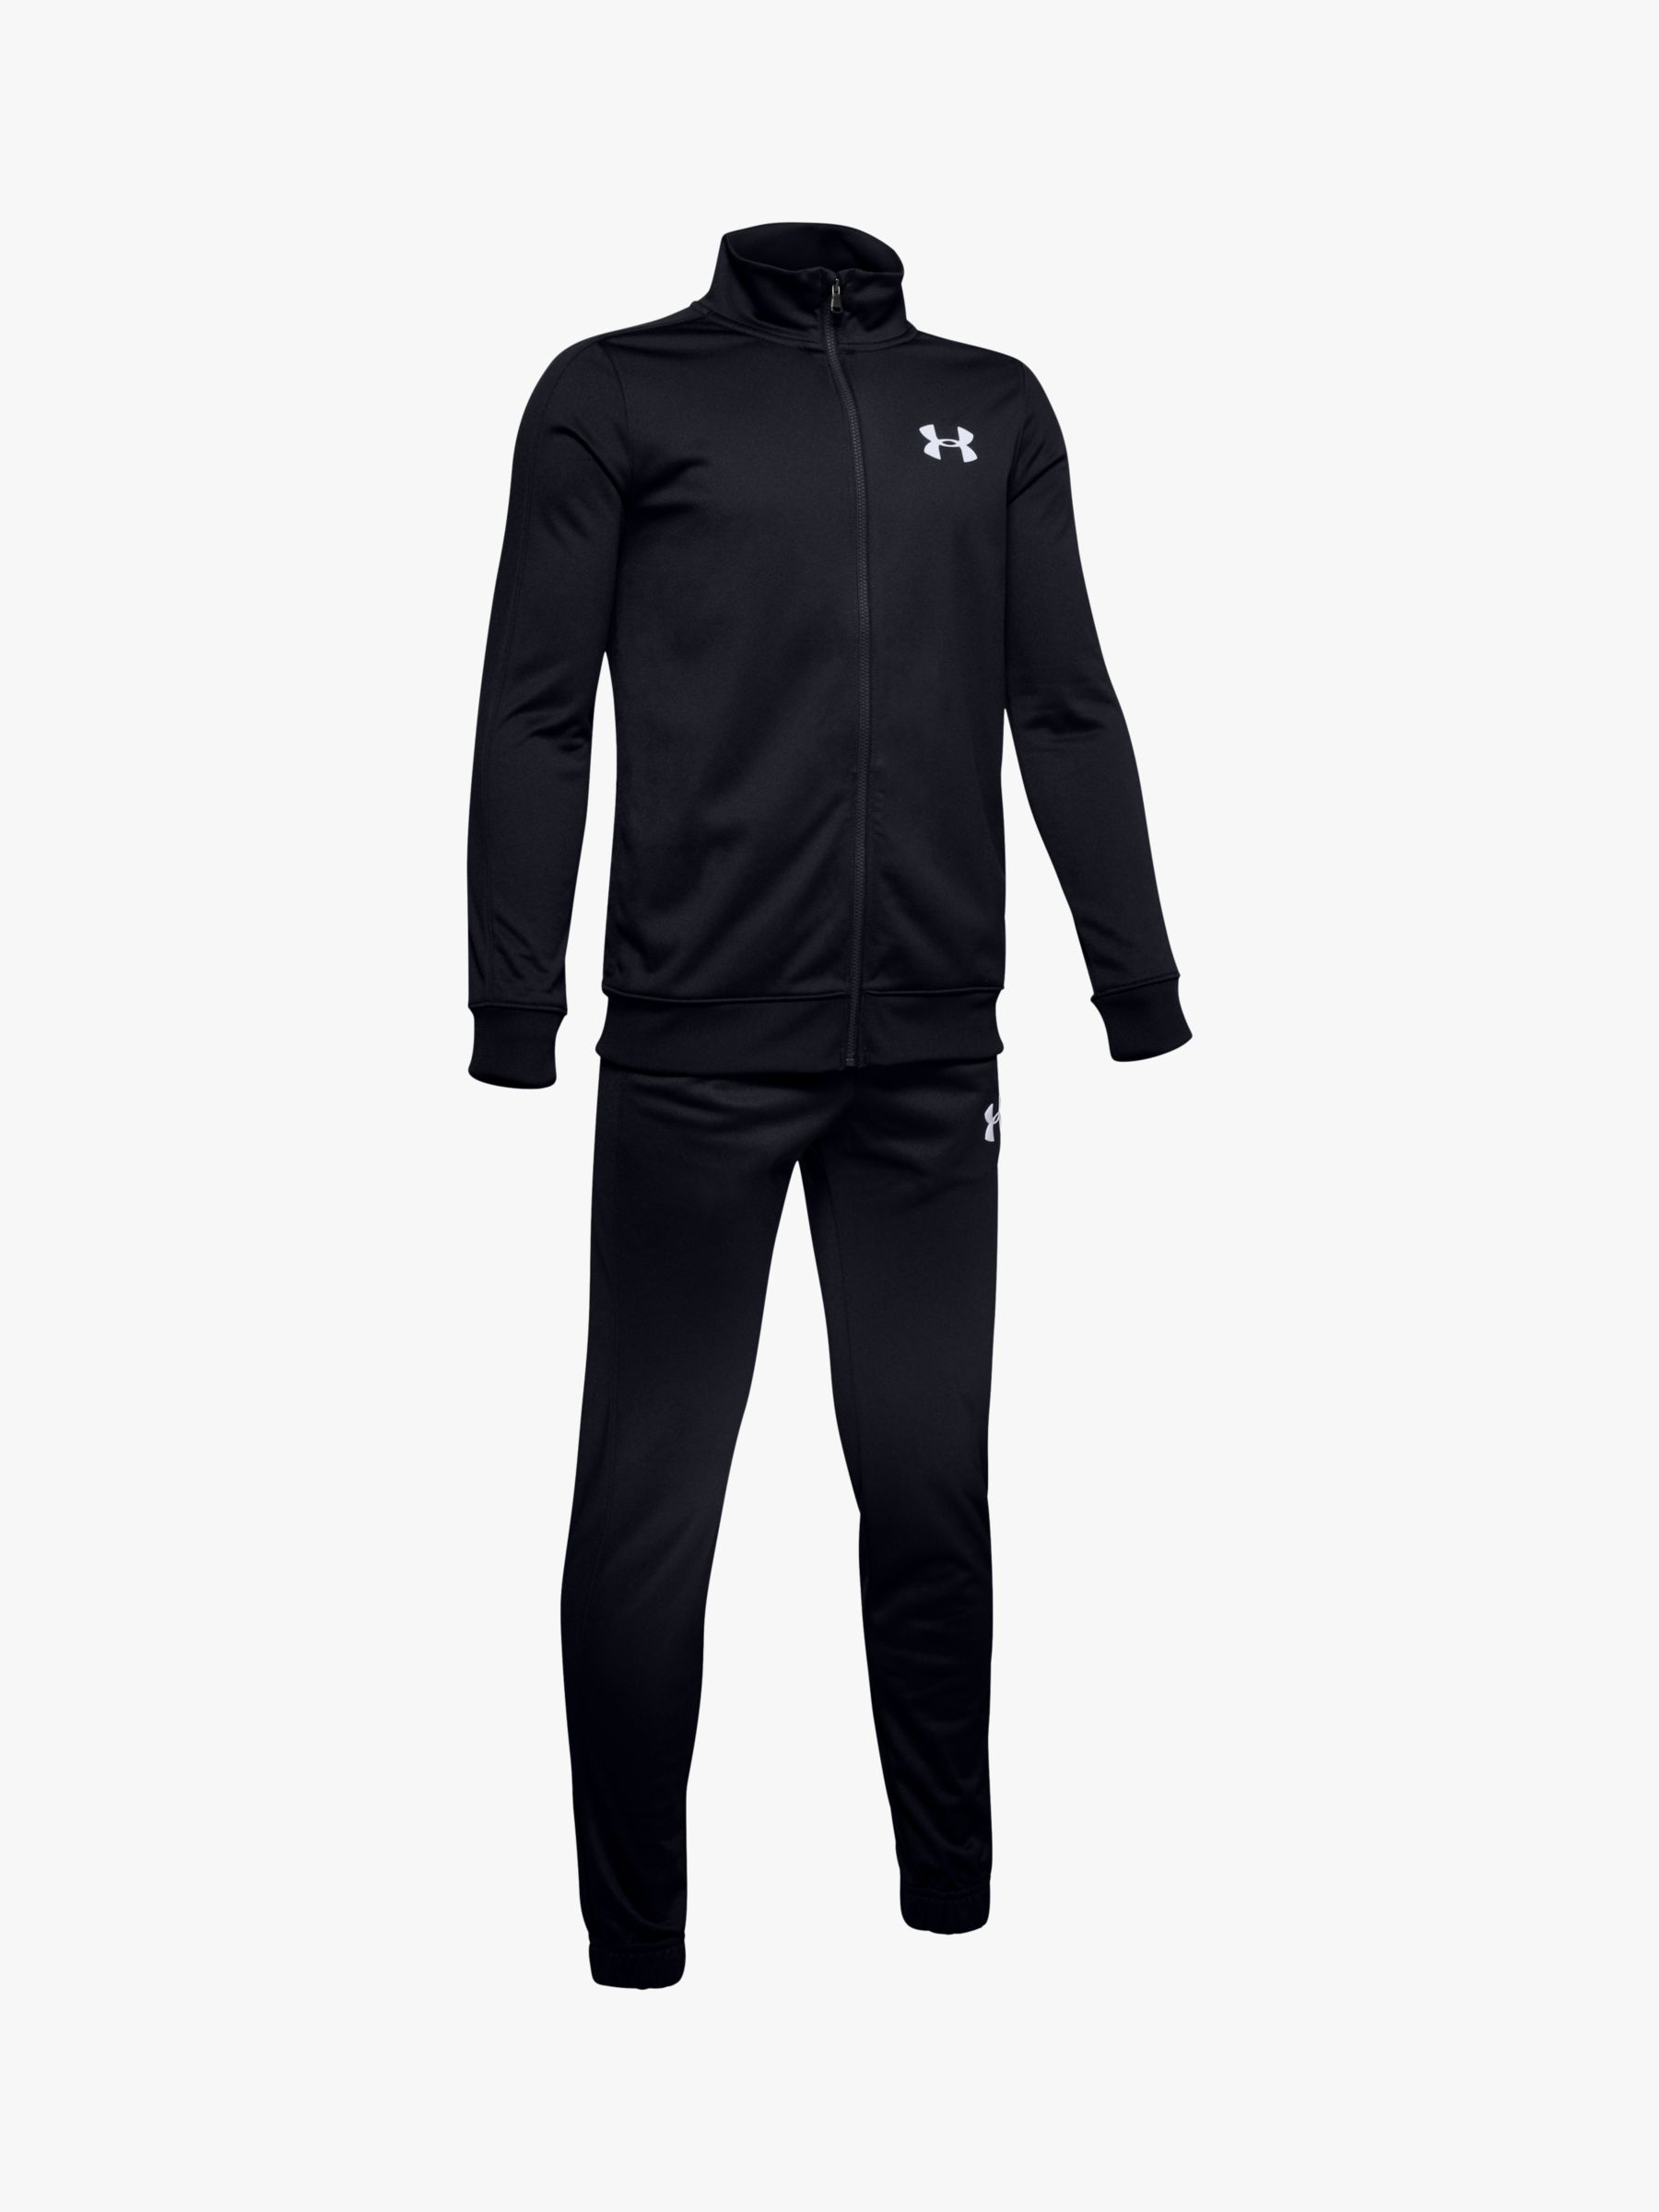 Image of Under Armour Childrens Knit Tracksuit Black